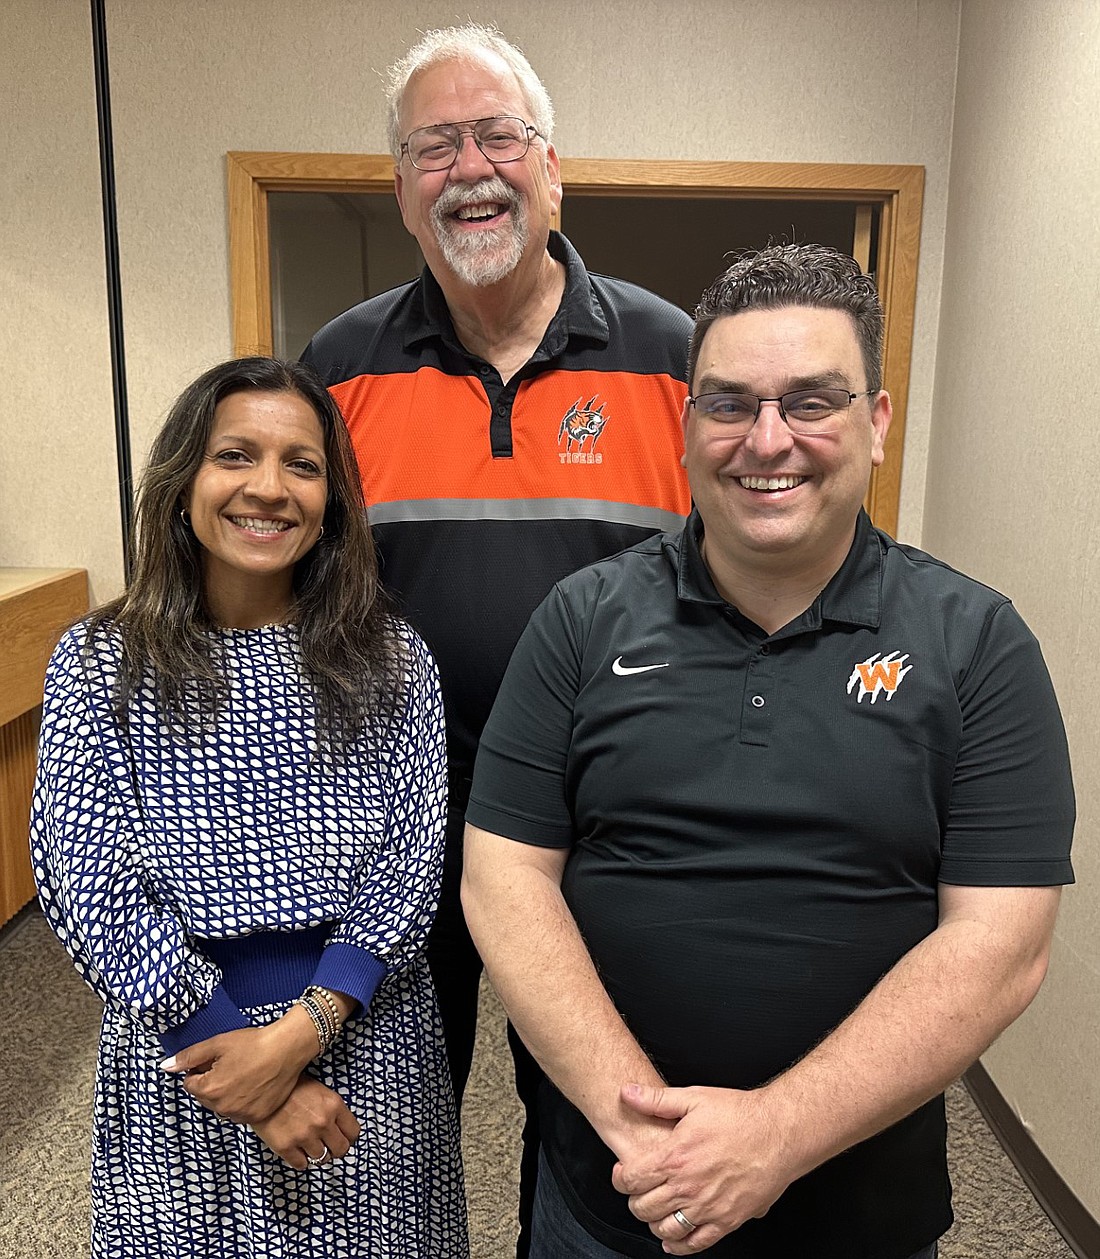 Filing for the Warsaw School Board election at 8 a.m. Tuesday at the county clerk’s office are (L to R) Mallika Klingaman, district 3; Randy Polston, district 4; and Matt Deuel, district 6. Photo by David Slone, Times-Union